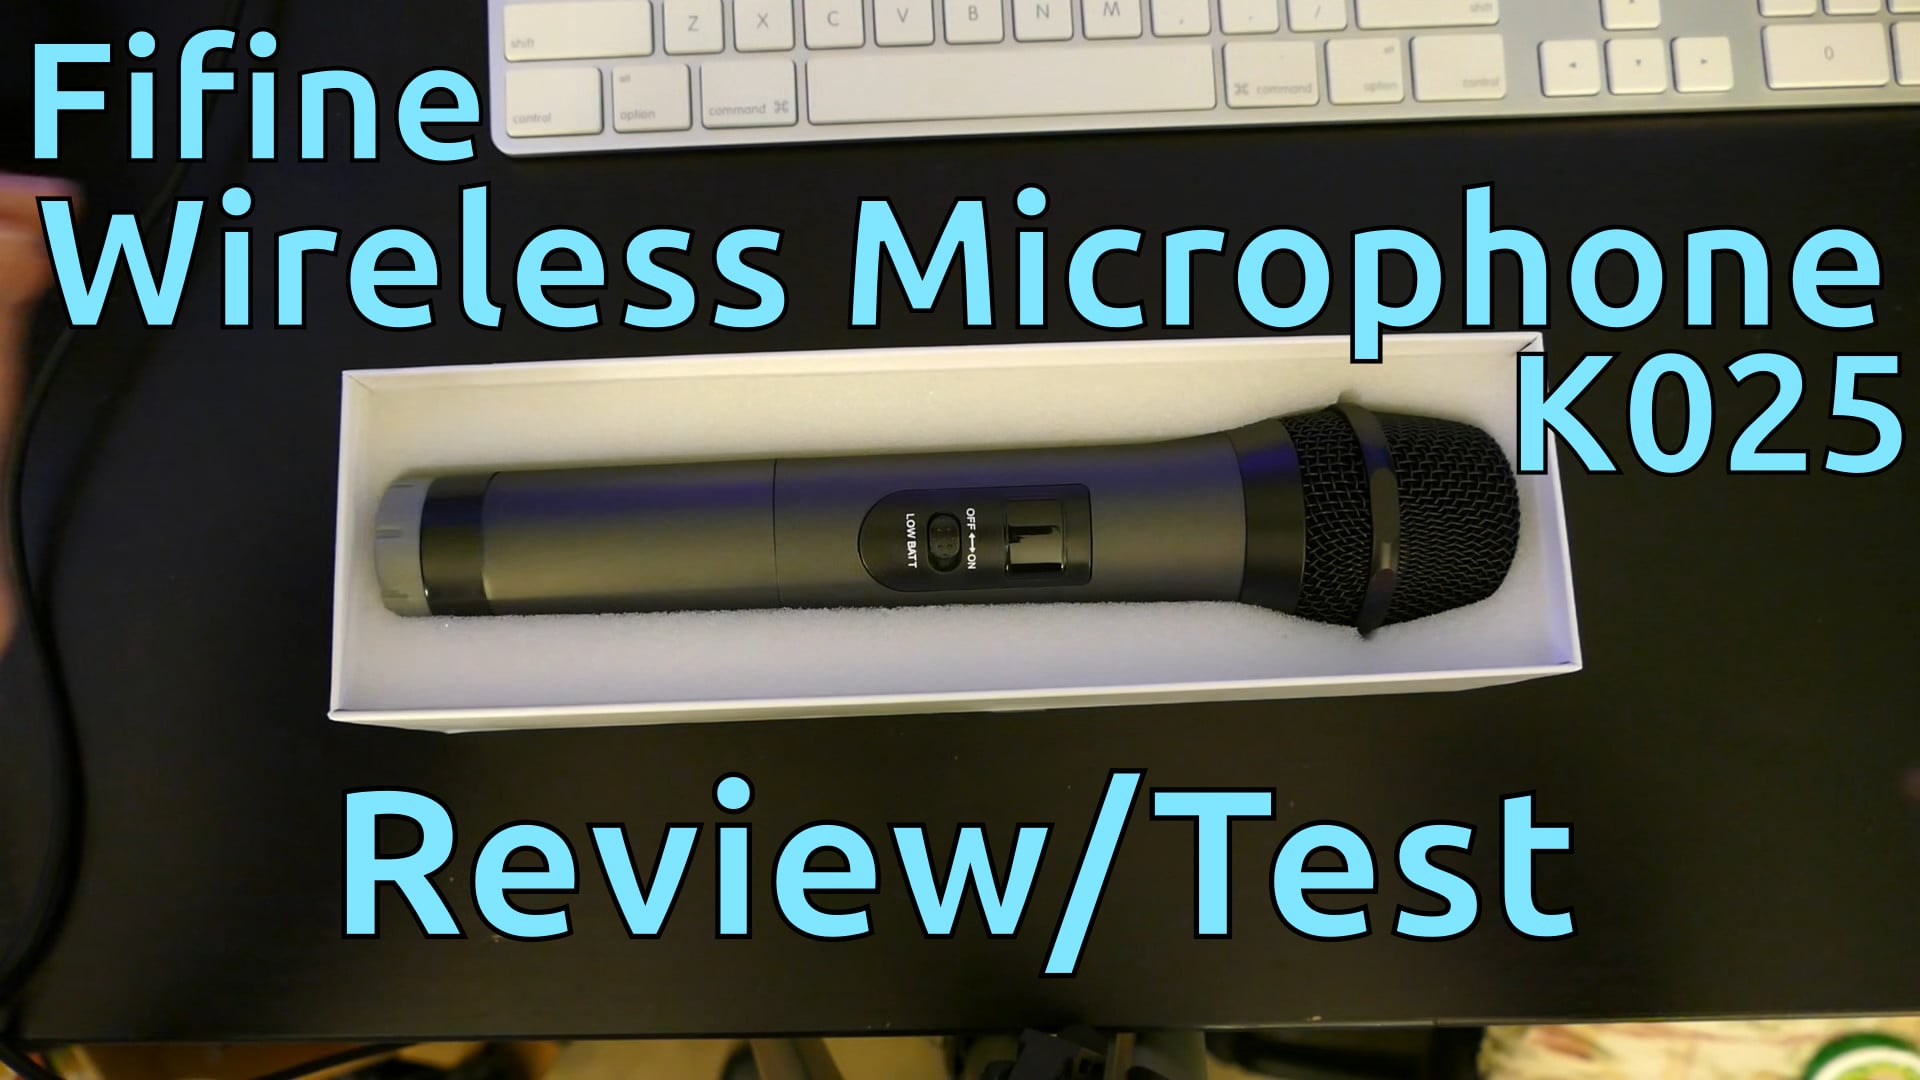 Fifine Wireless Microphone K025 Review/Test